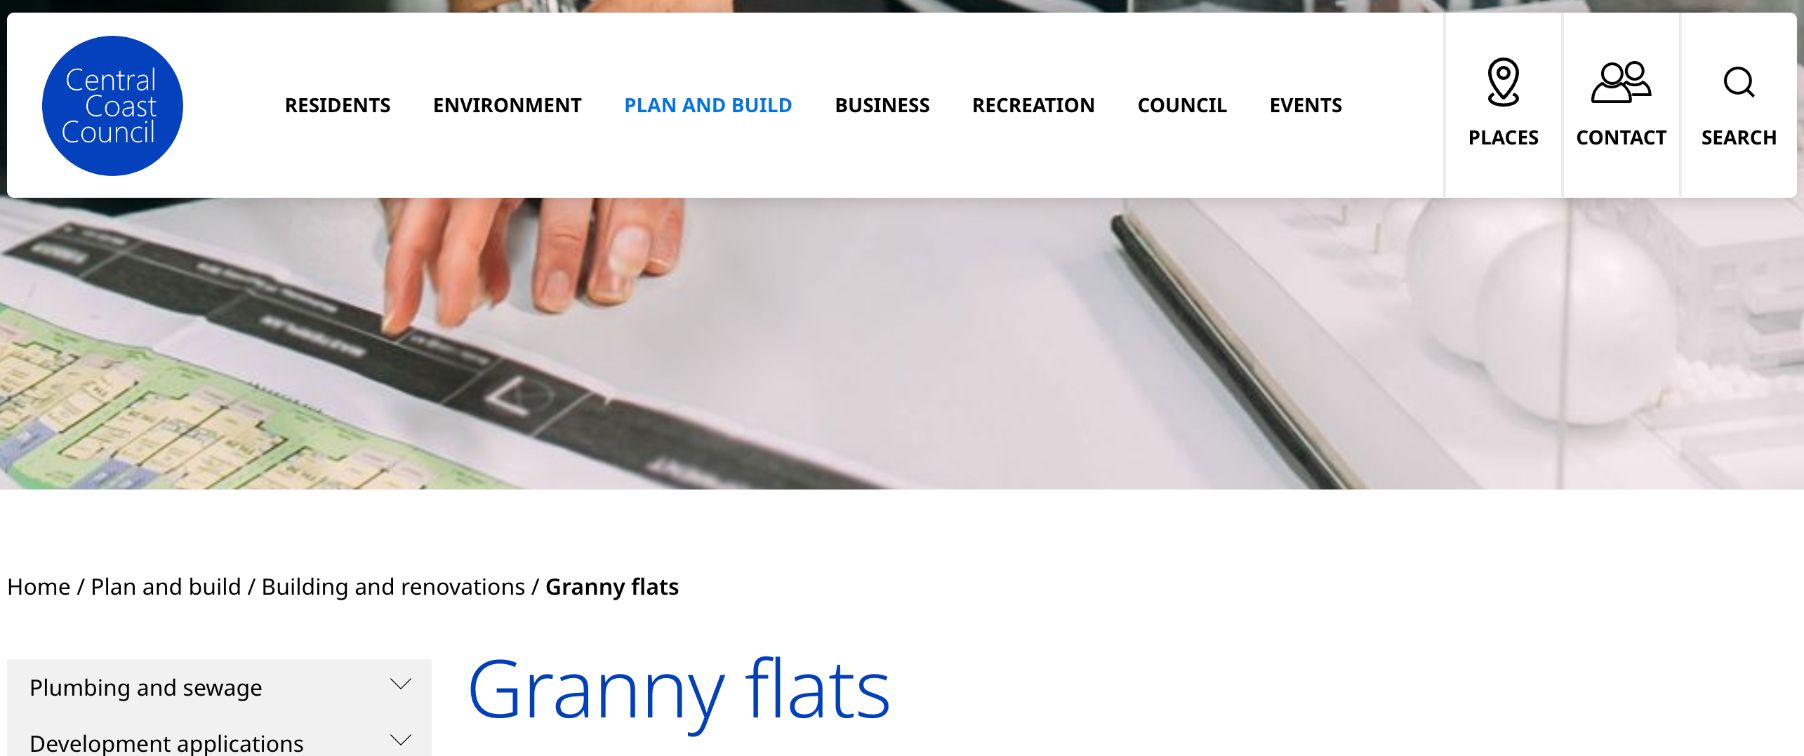 Landing page for central coast granny flats